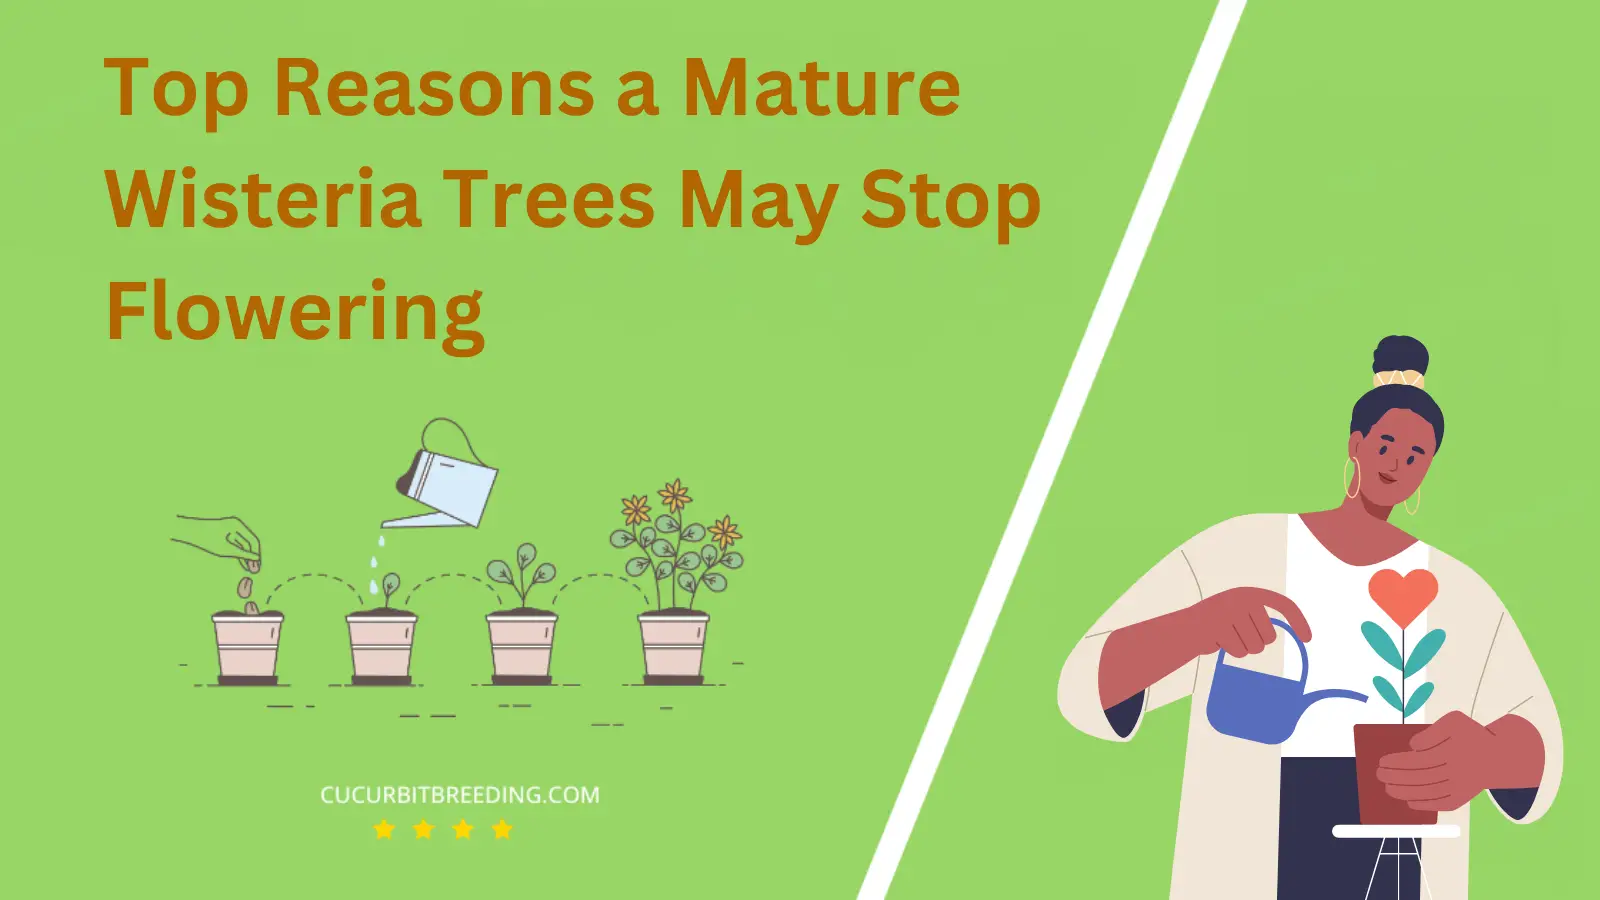 Top Reasons a Mature Wisteria Trees May Stop Flowering